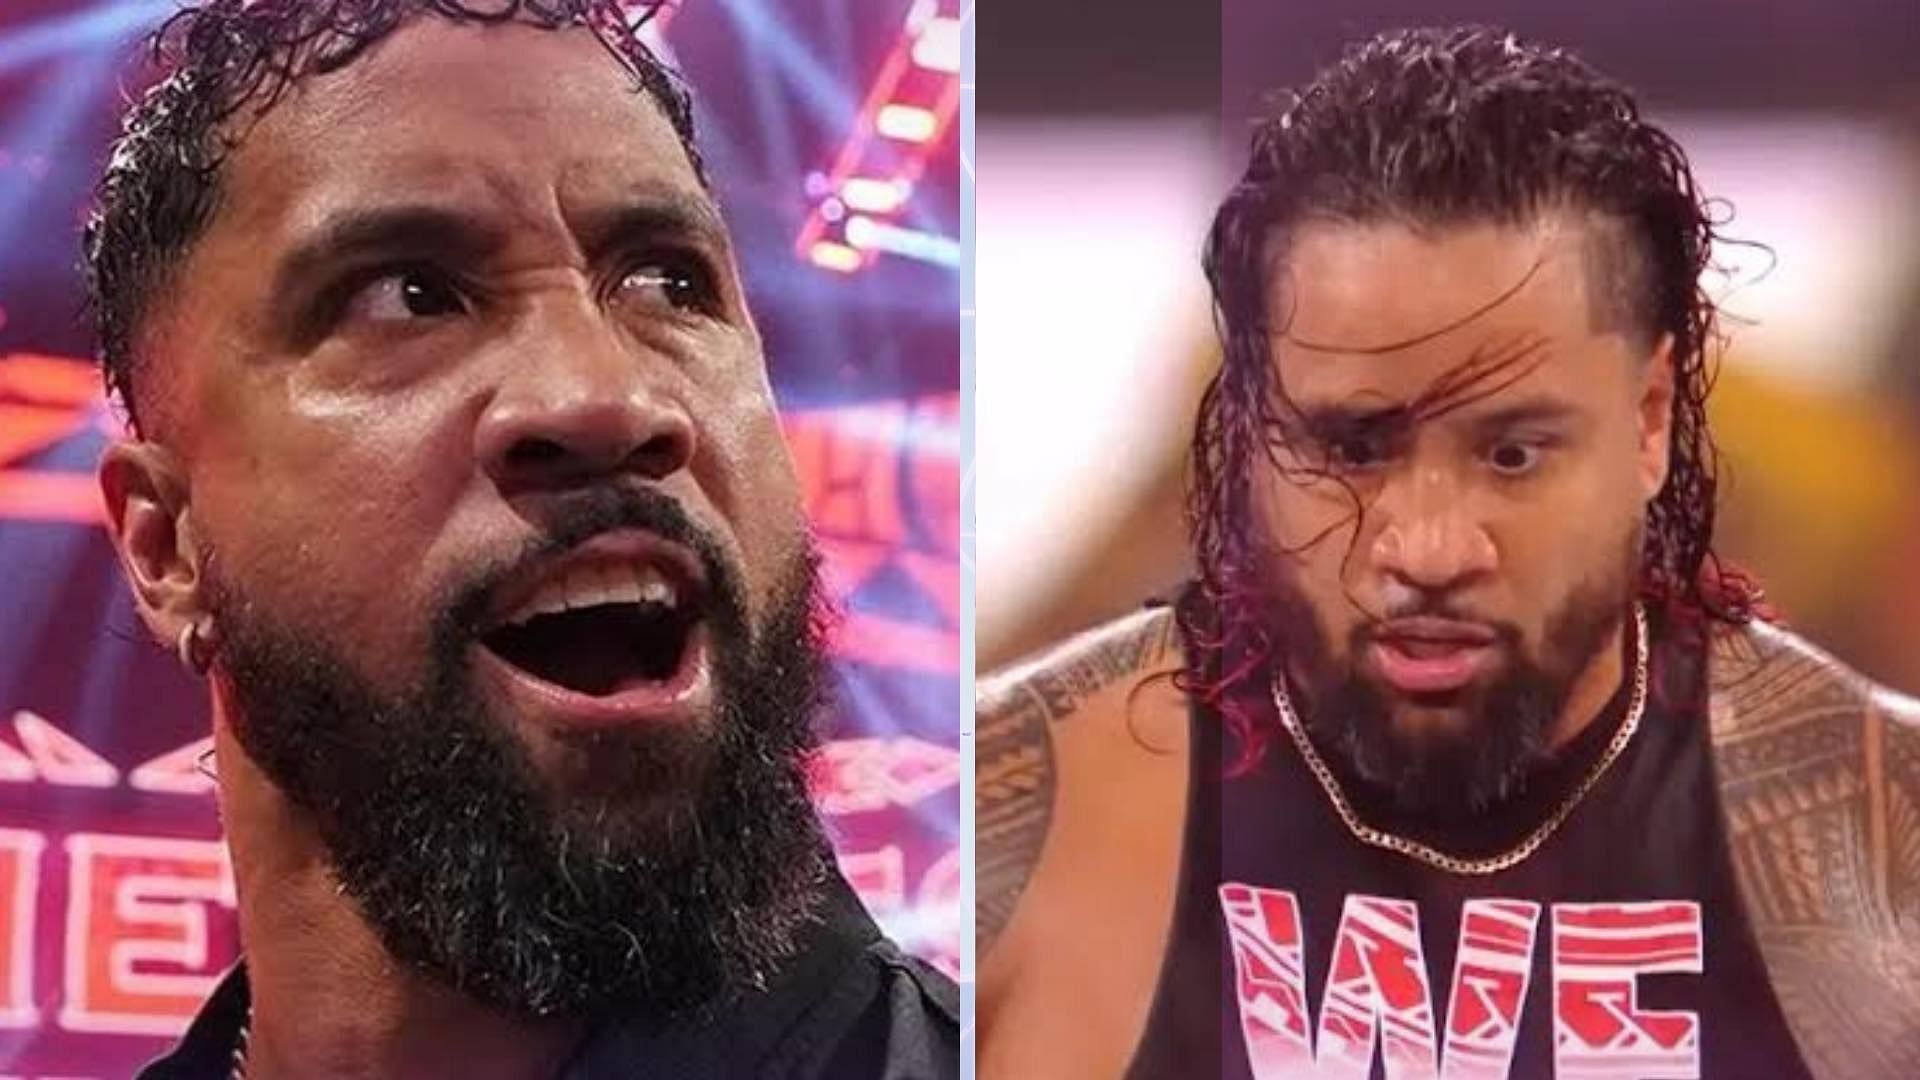 Jey Uso could have several exciting rivalries when he returns to WWE